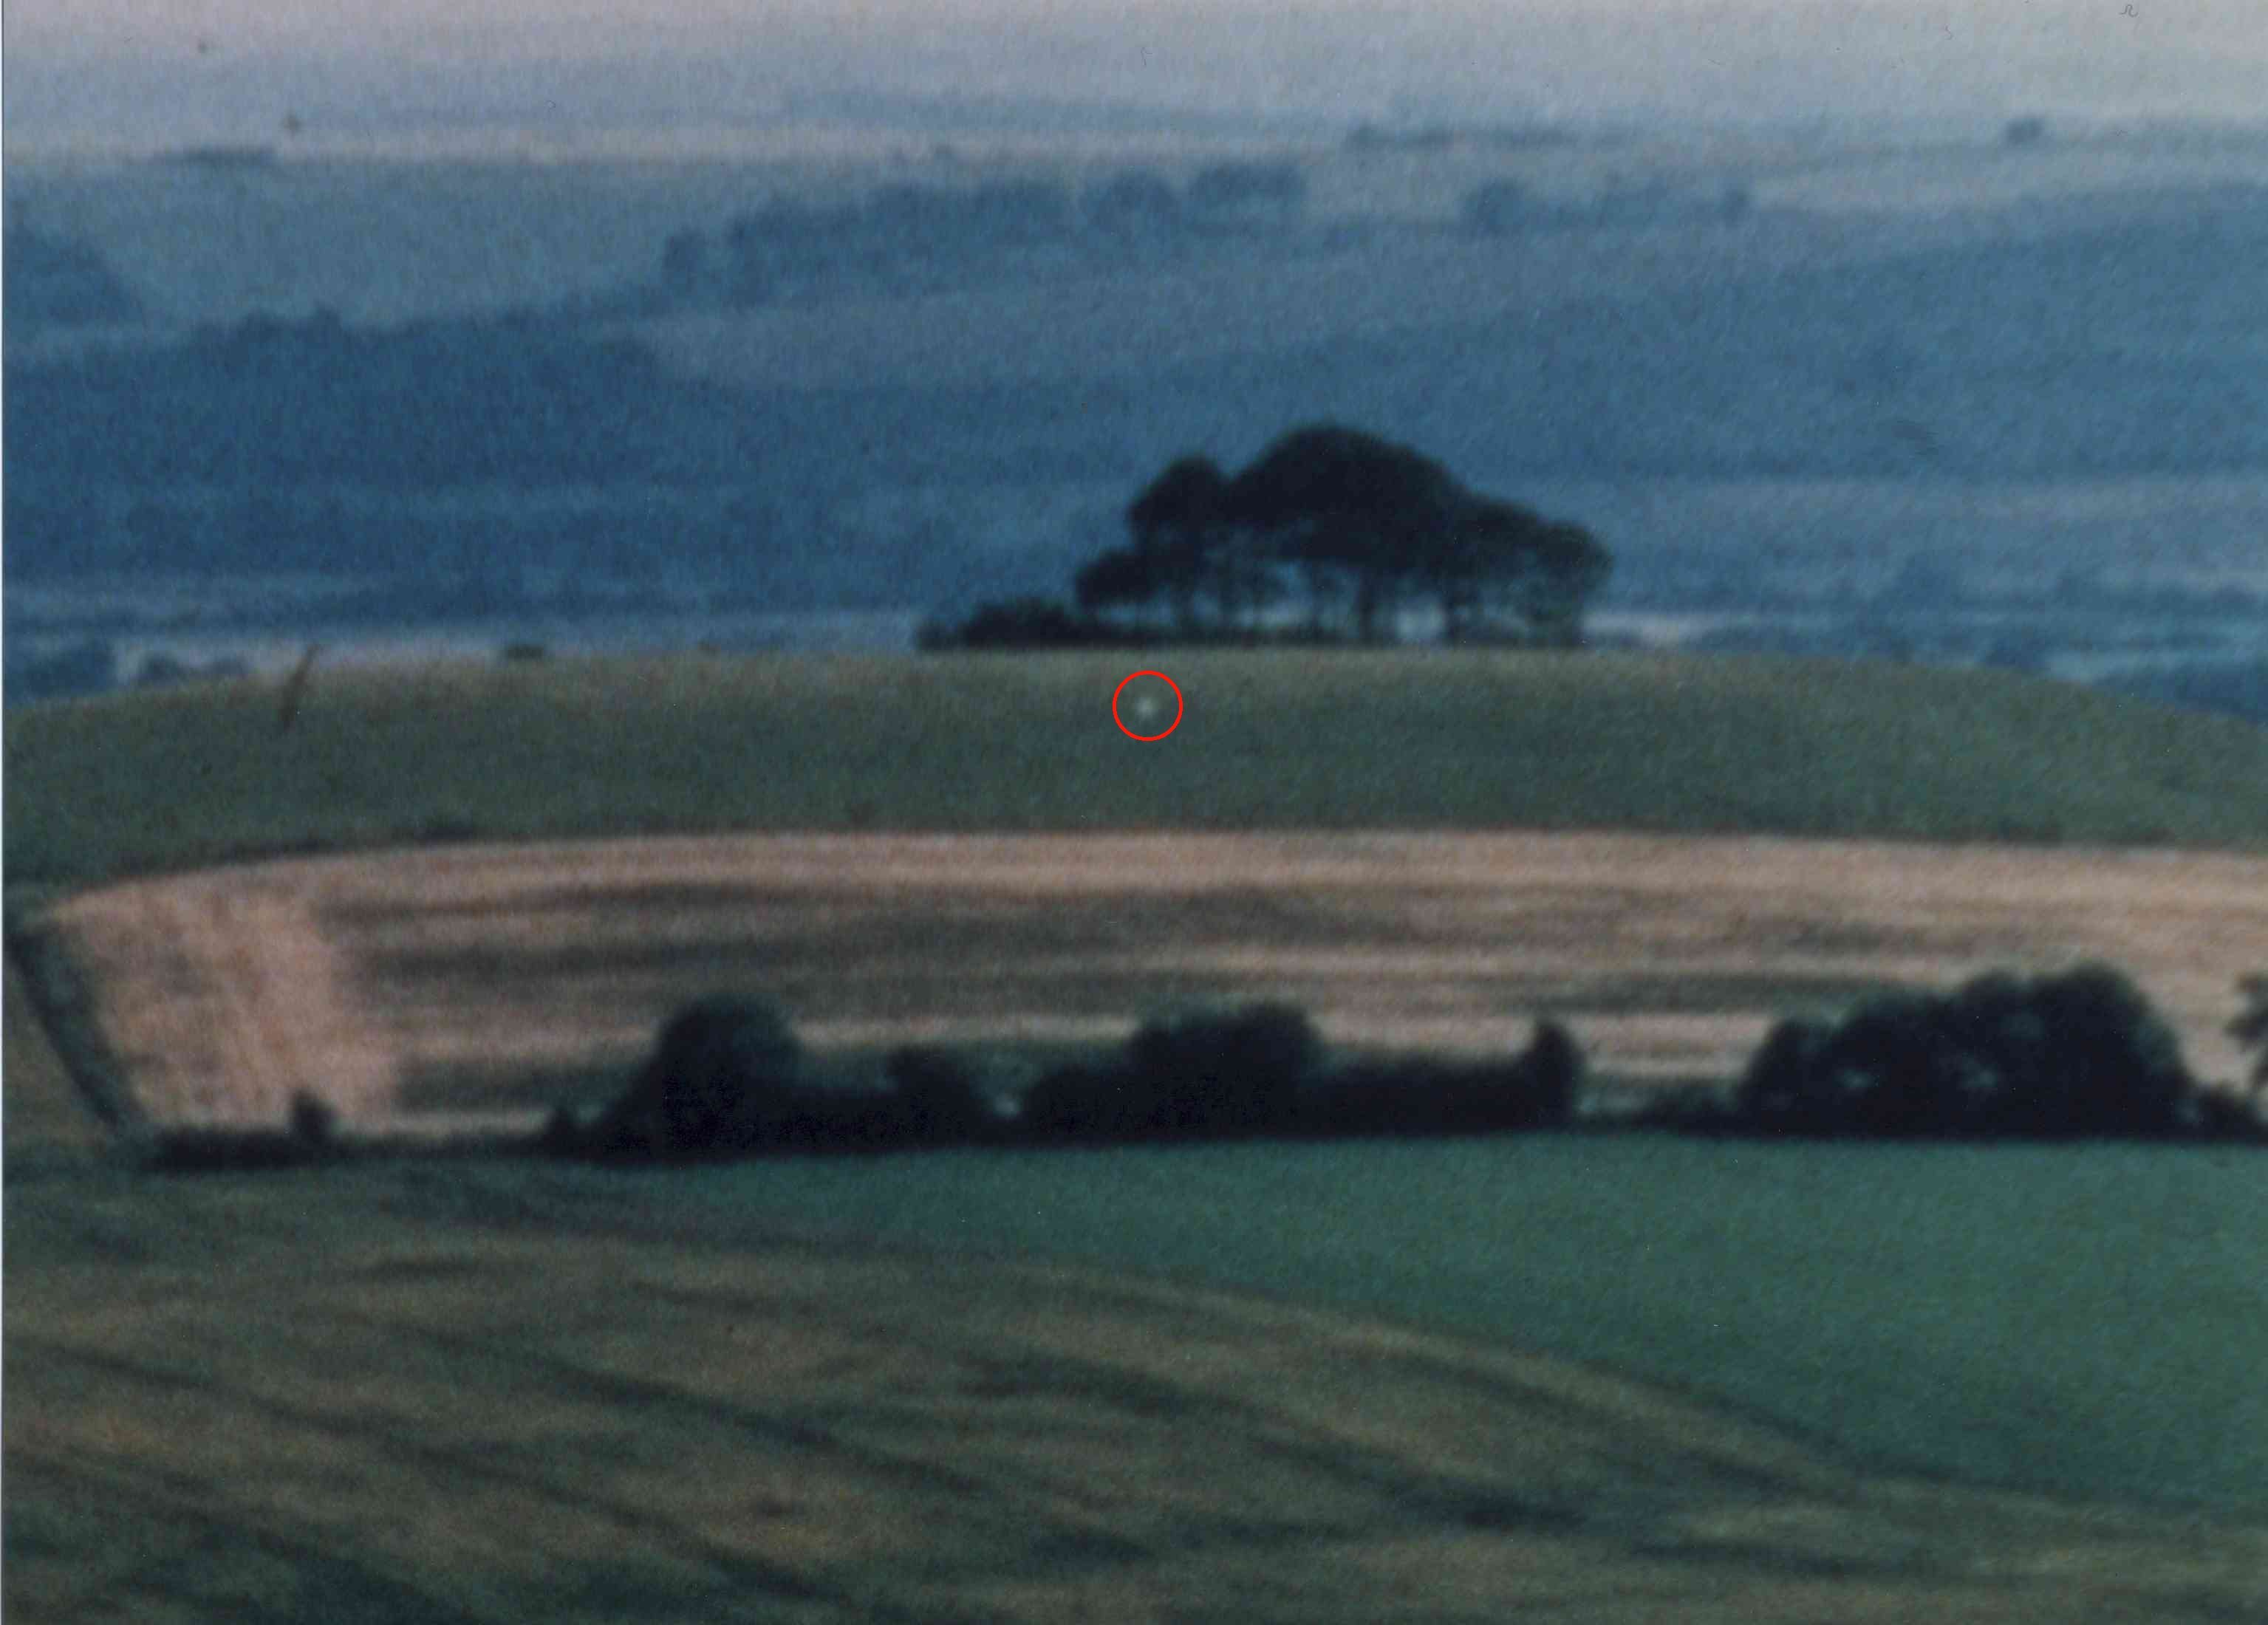 In July 1999, the landing of an unknown flying light was photographed at daylight on Woodborough Hill, Wiltshire, South England.